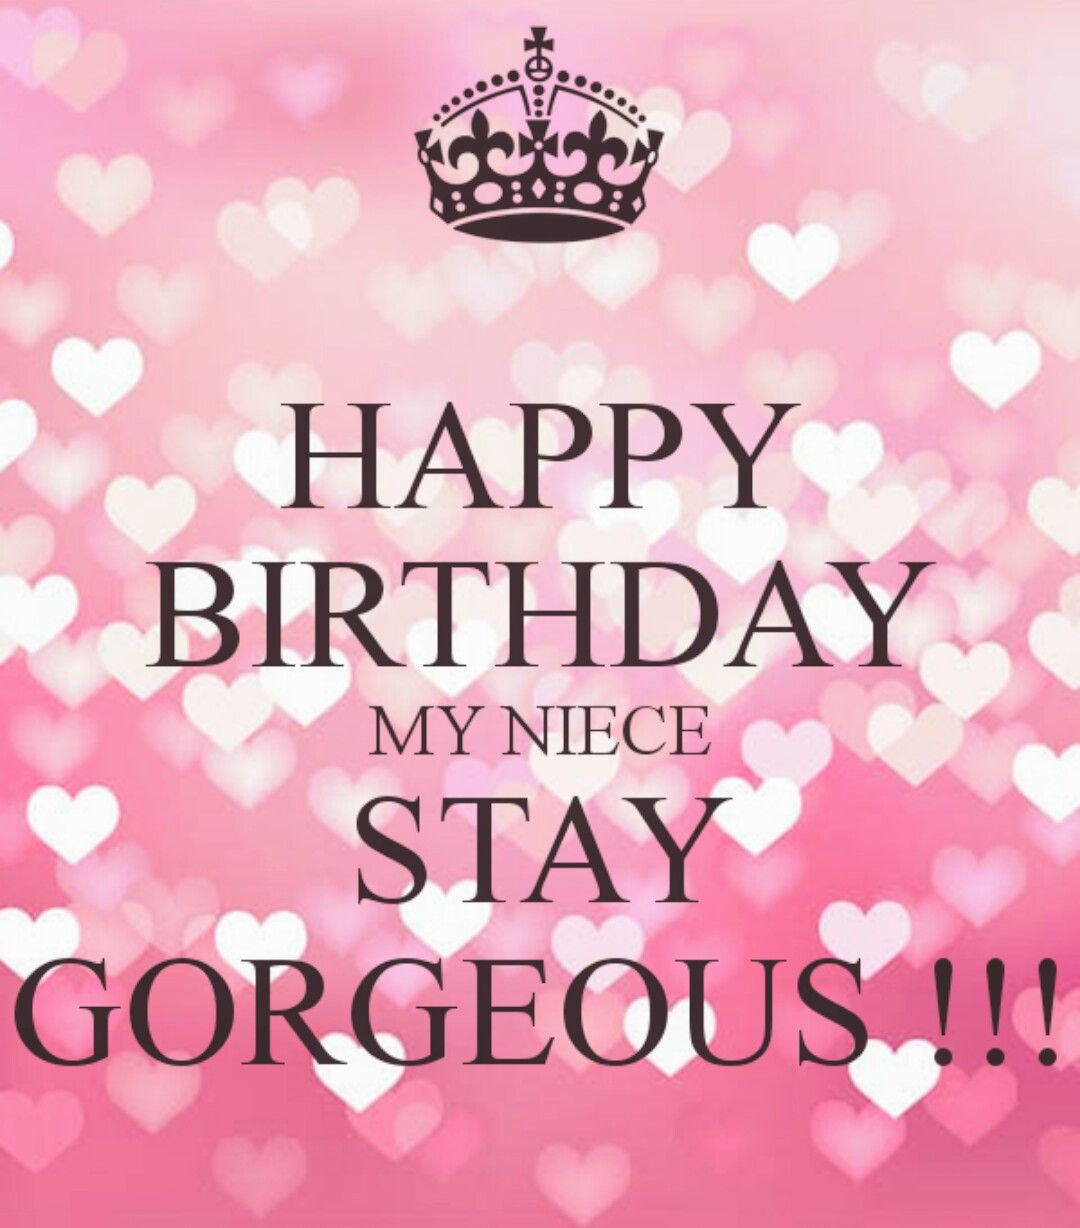 Happy birthday images For Niece💐 - Free Beautiful bday cards and ...